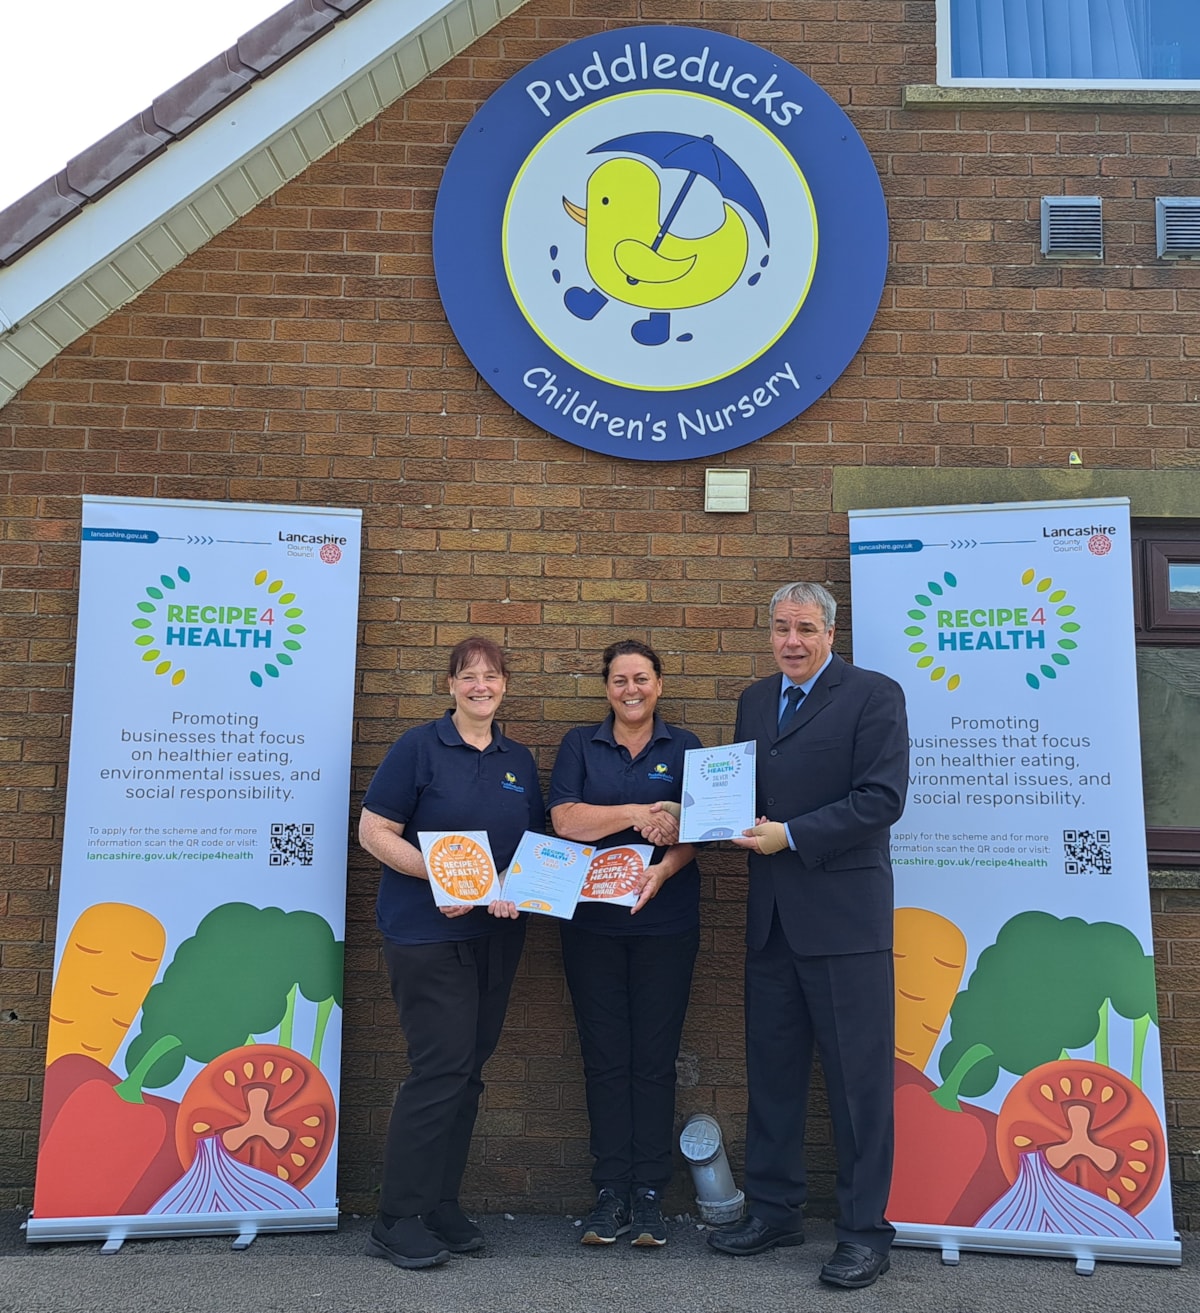 From left: Puddleducks Children's Nursery staff Clare Wilson and Joanne Earnshaw accept the Awards from Jamal Dermott, Recipe 4 Health lead at Lancashire County Council